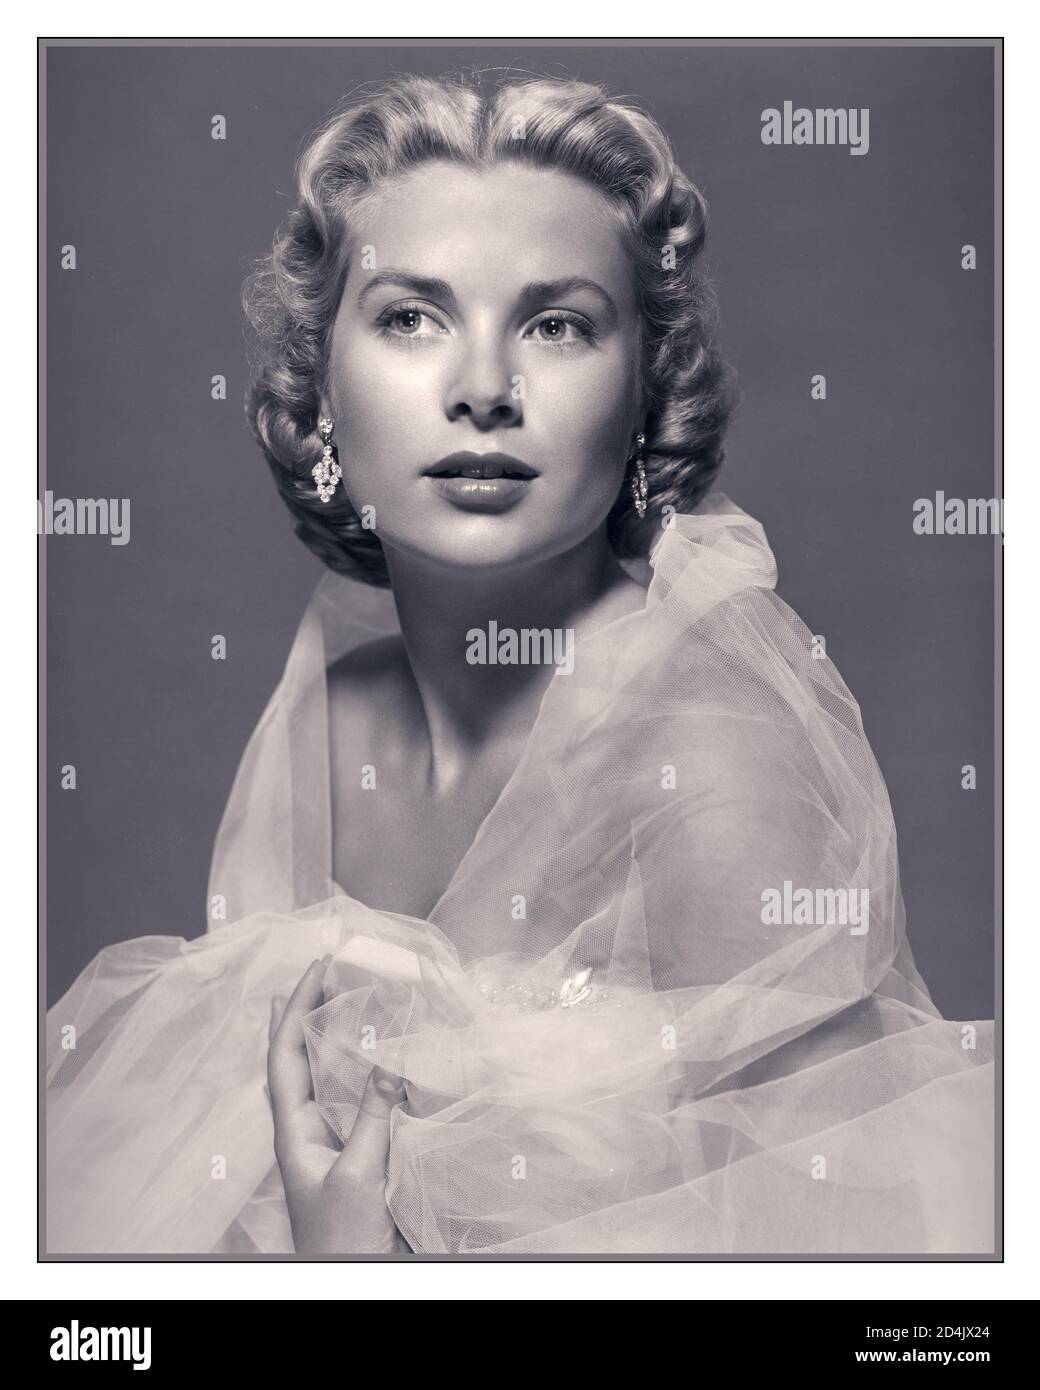 1950's GRACE KELLY Dial M For Murder Grace Kelly In Publicity Shot 1954 studio promotional portrait Hollywood actress Grace Kelly in 1954. Grace Patricia Kelly, also known as Grace of Monaco, was an American film actress who, after starring in several significant films in the early to mid-1950s, became Princess of Monaco by marrying Prince Rainier III in April 1956 Hollywood USA Stock Photo